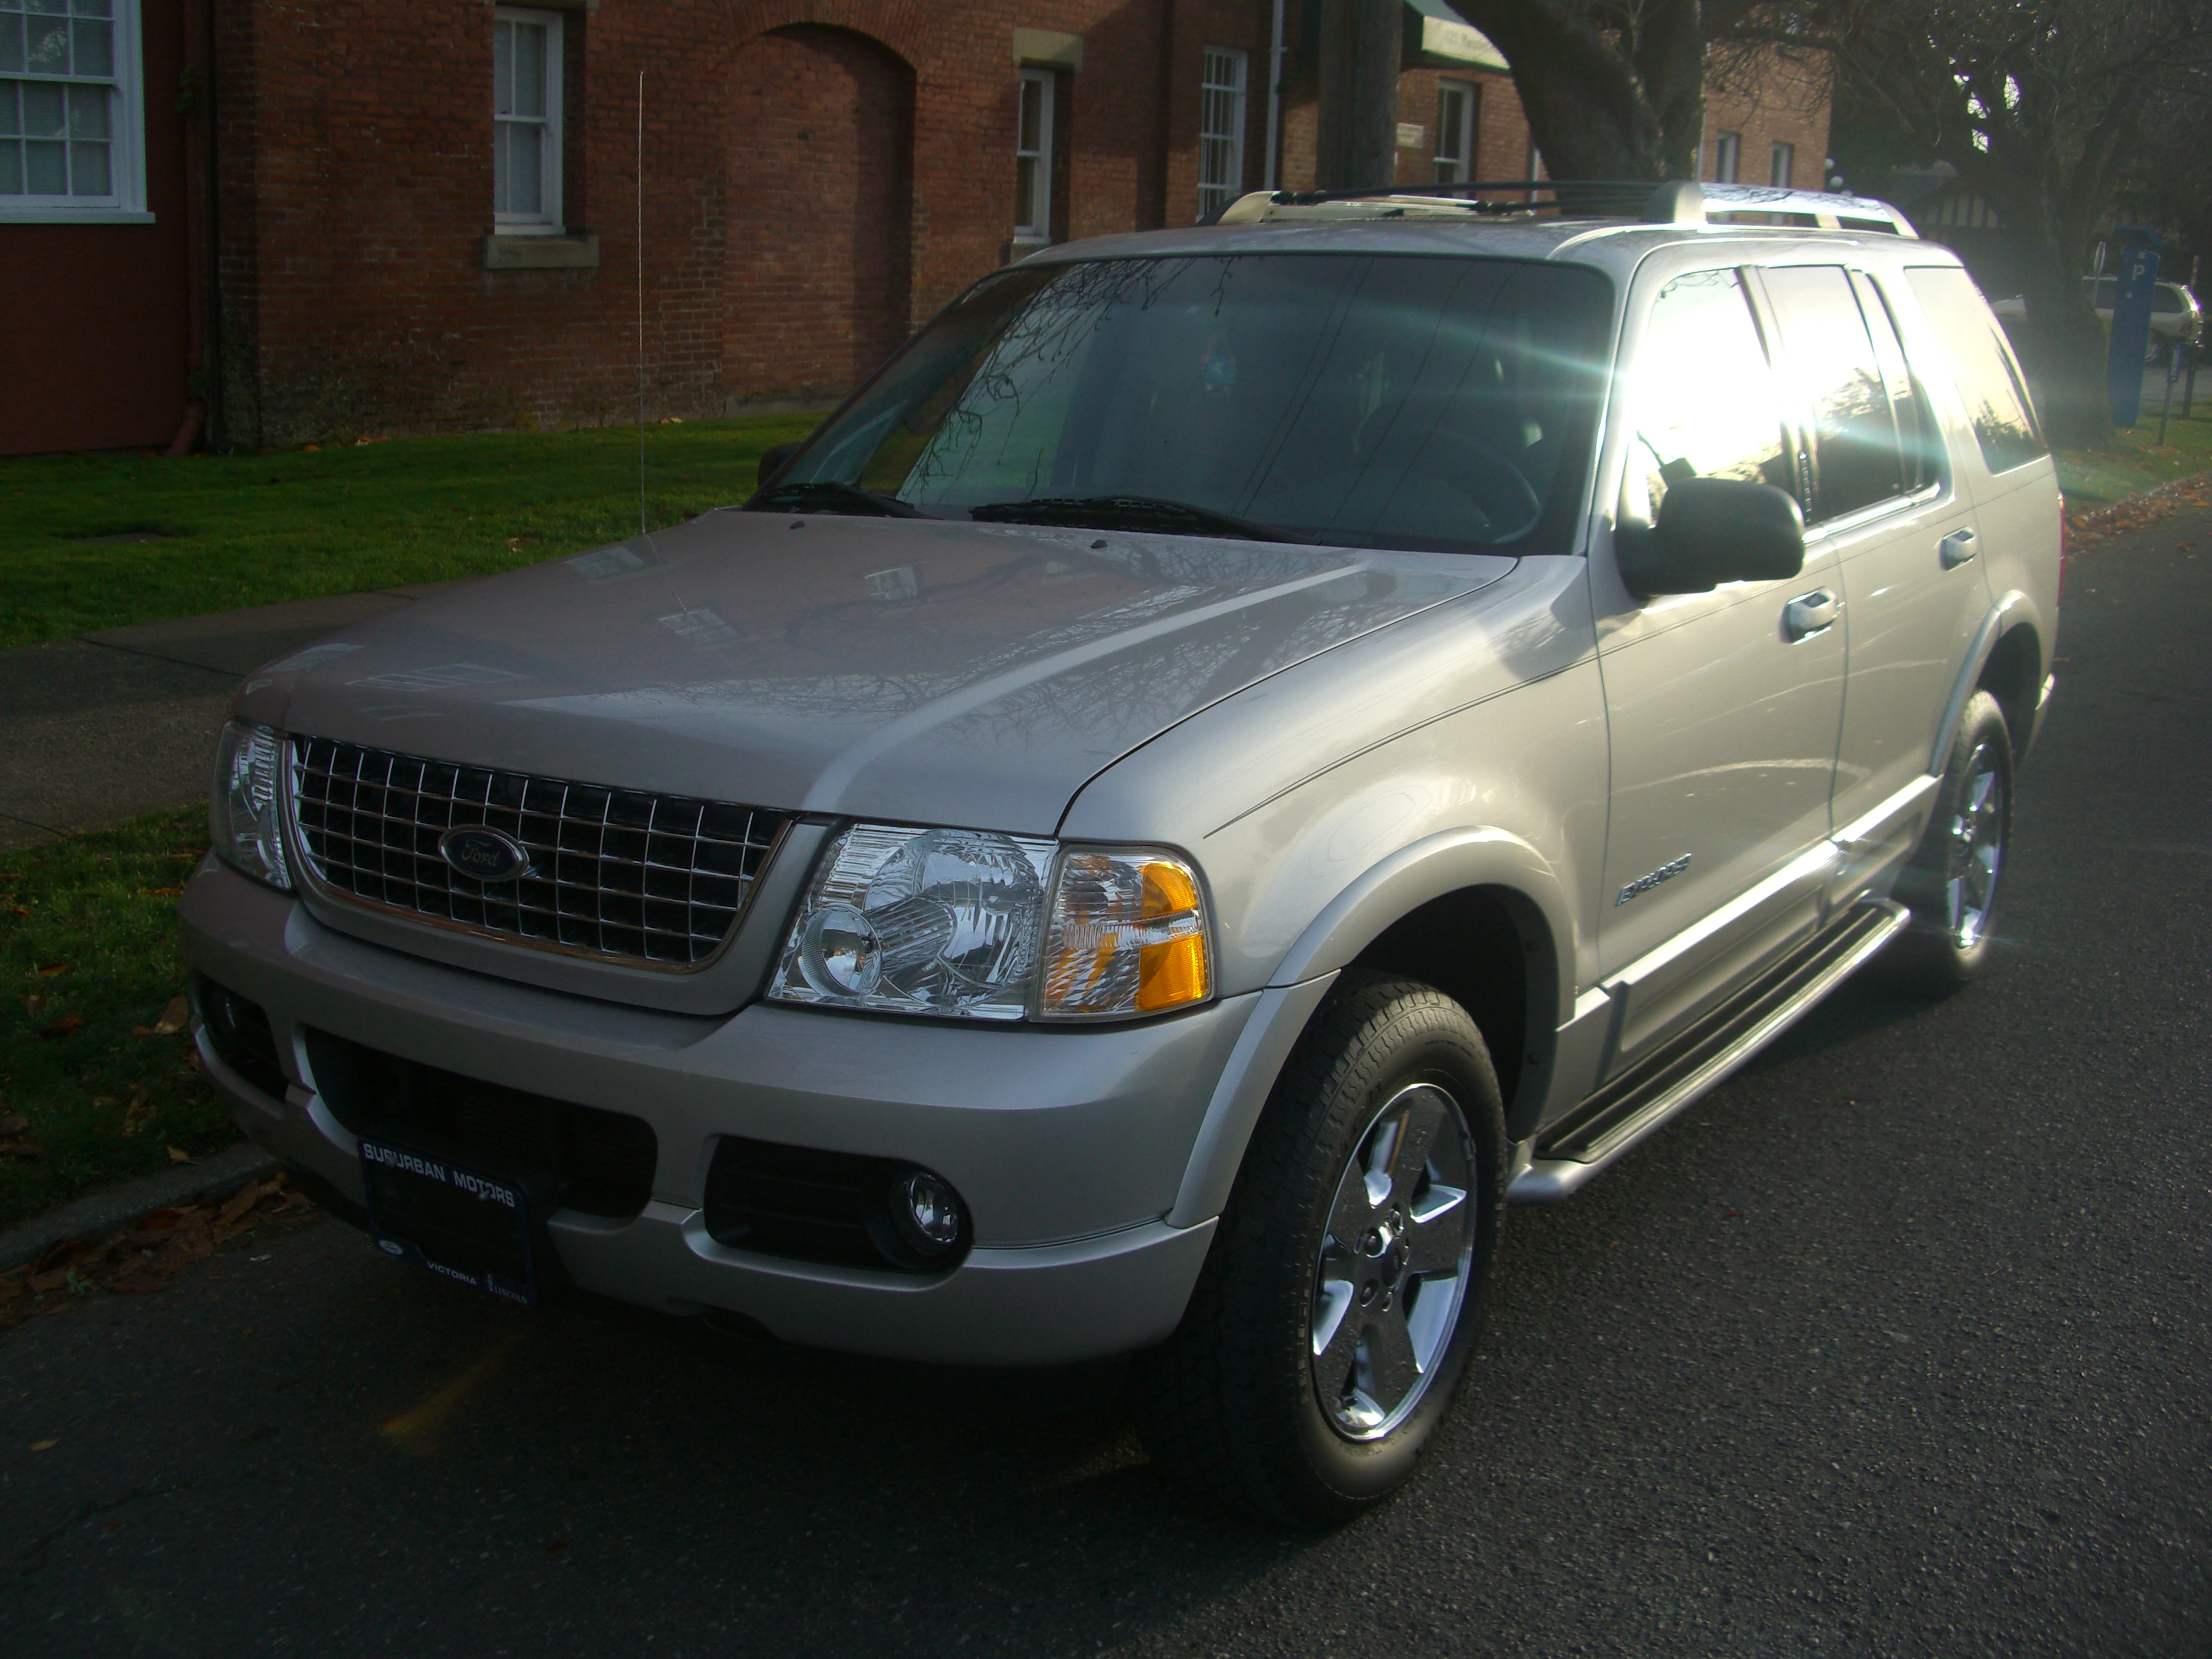 2005 Ford Explorer Ltd. - Forward Auto Gallery 2005 Ford Explorer 4.0 Towing Capacity